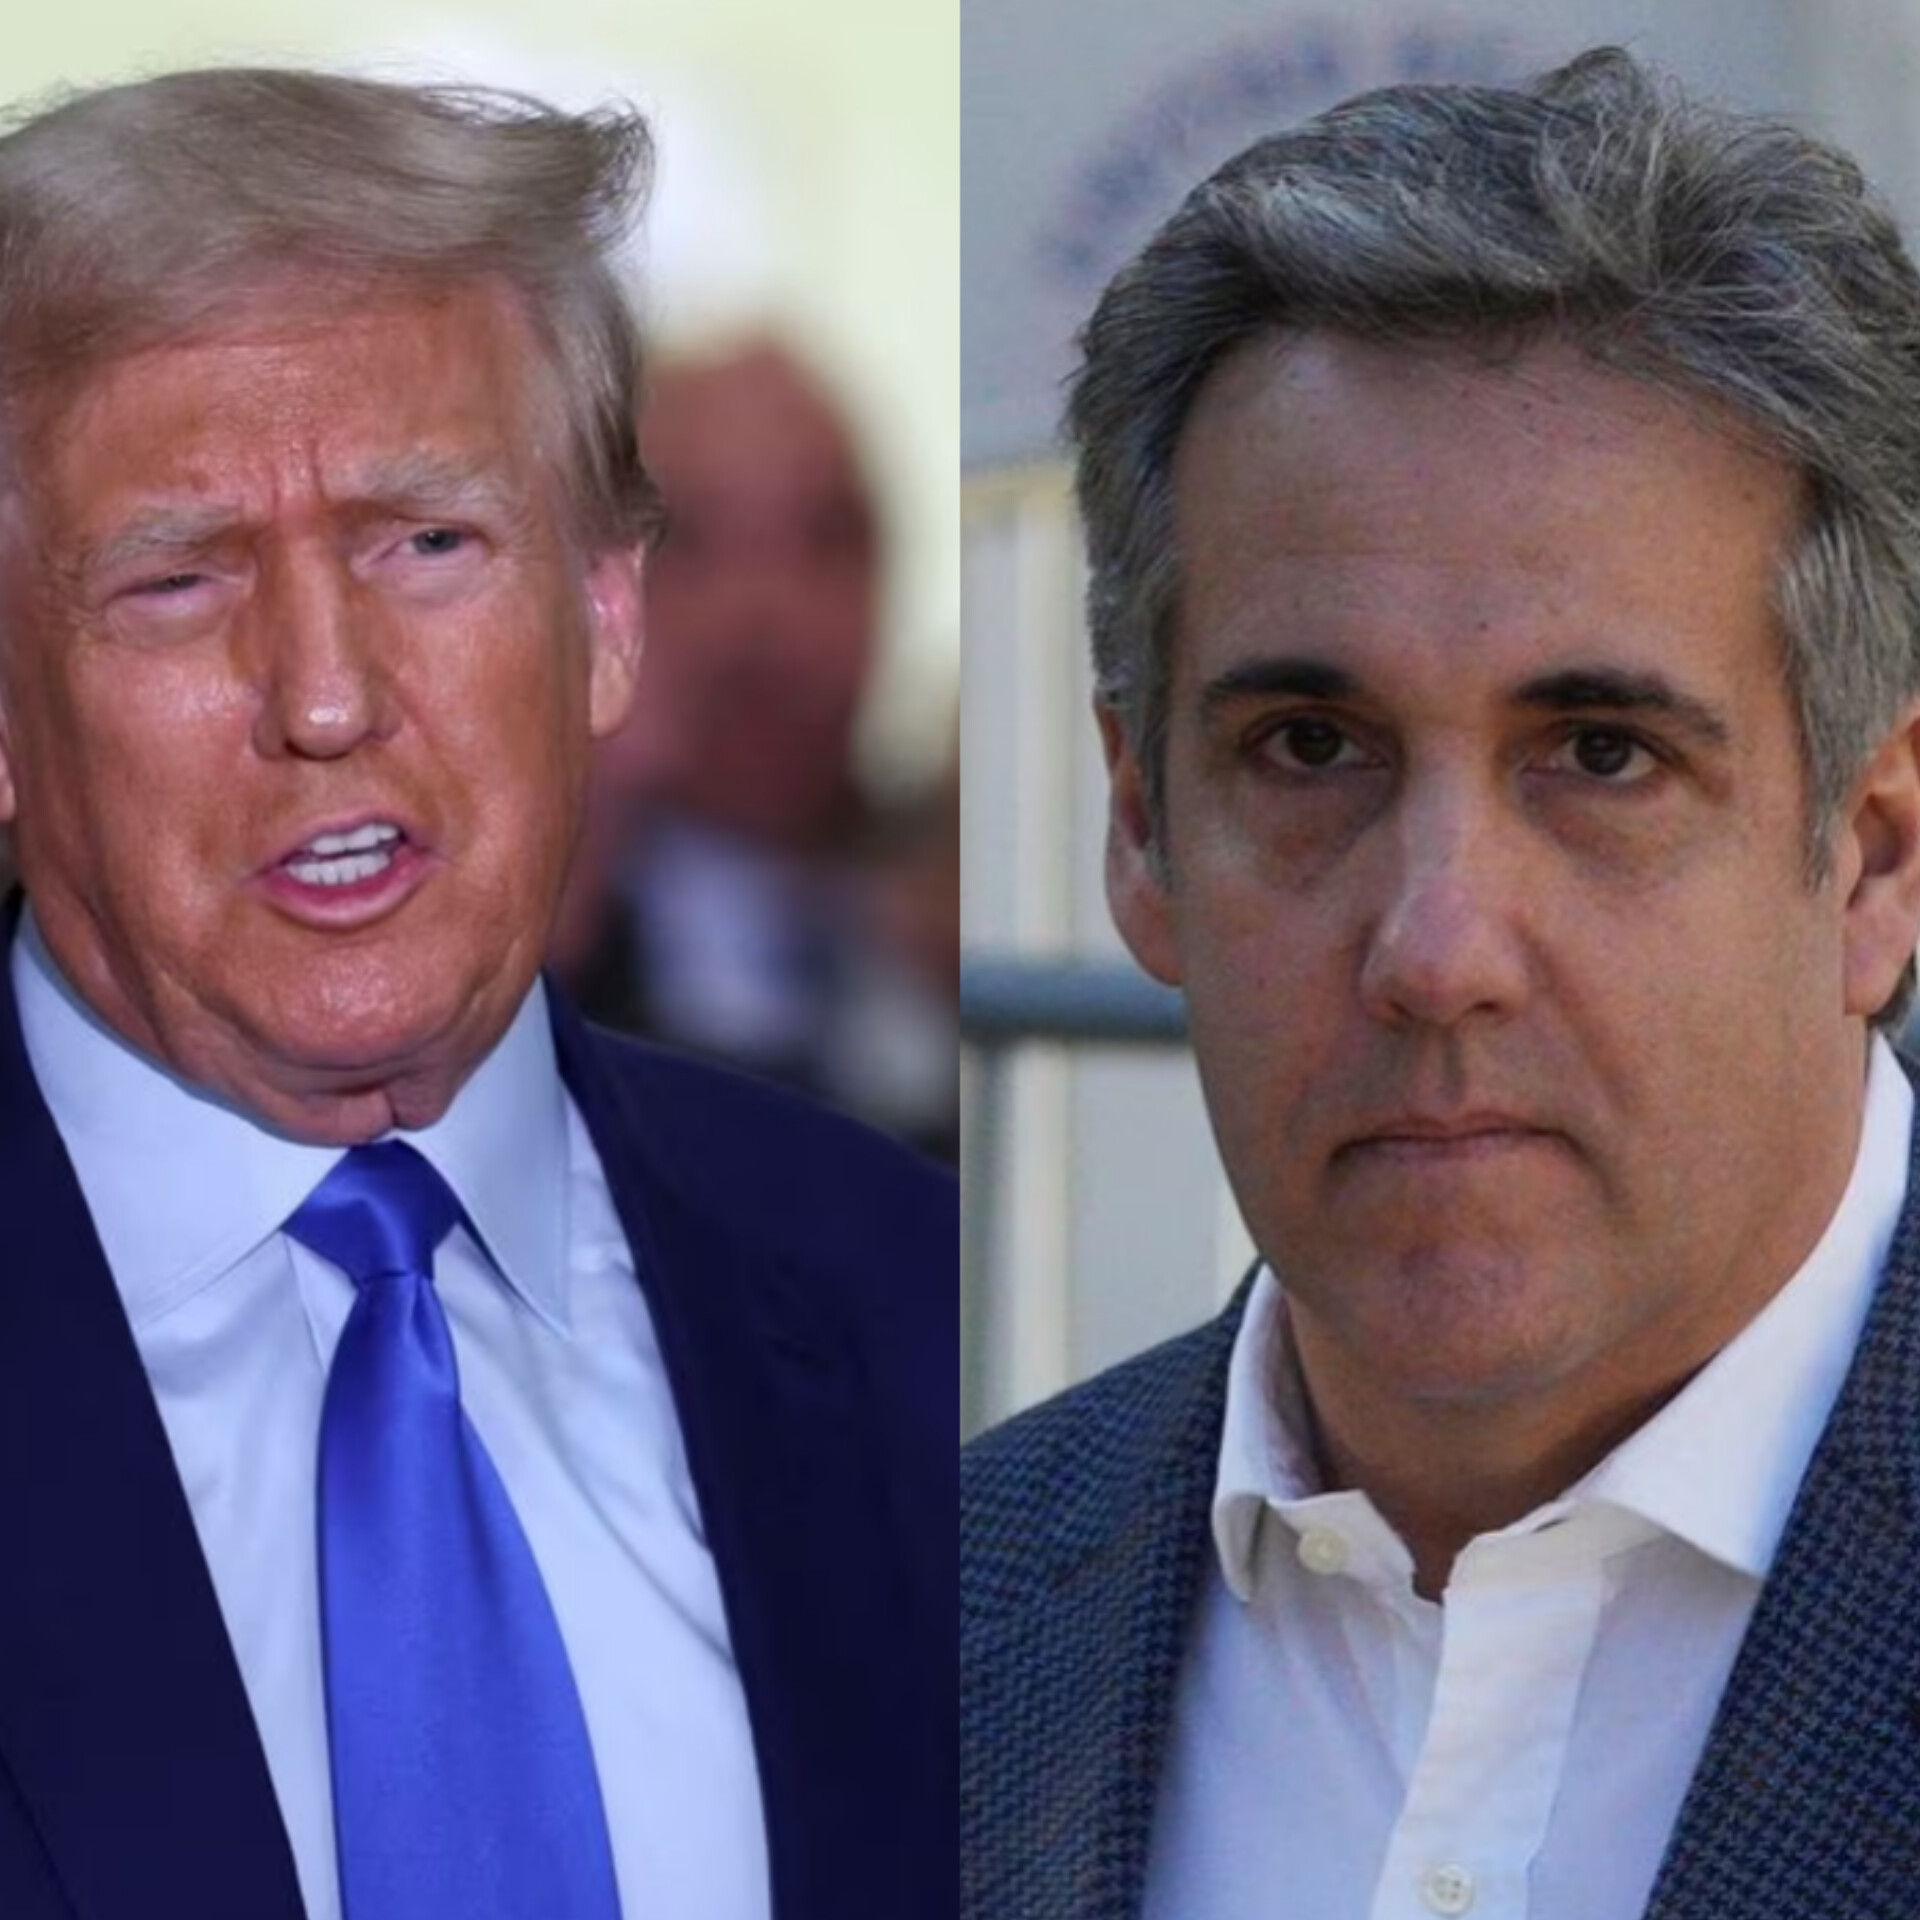 We put the value of his businesses at whatever number he picked - Former Trump lawyer and fixer Michael Cohen testifies